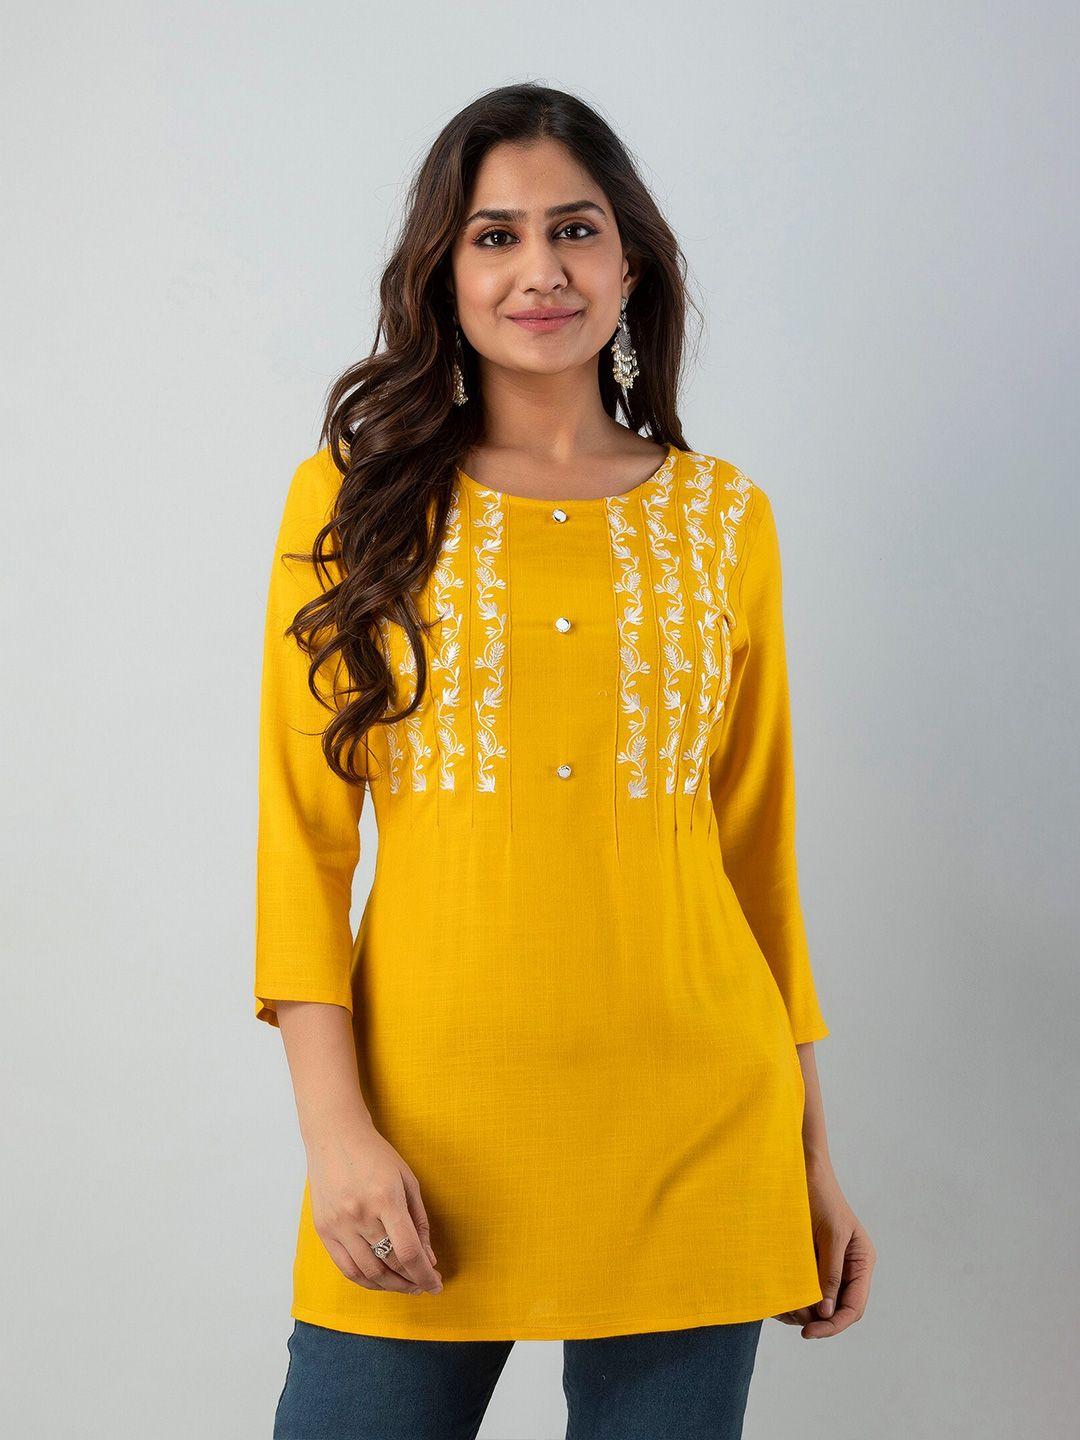 ckm mustard yellow & white floral embroidered longline top